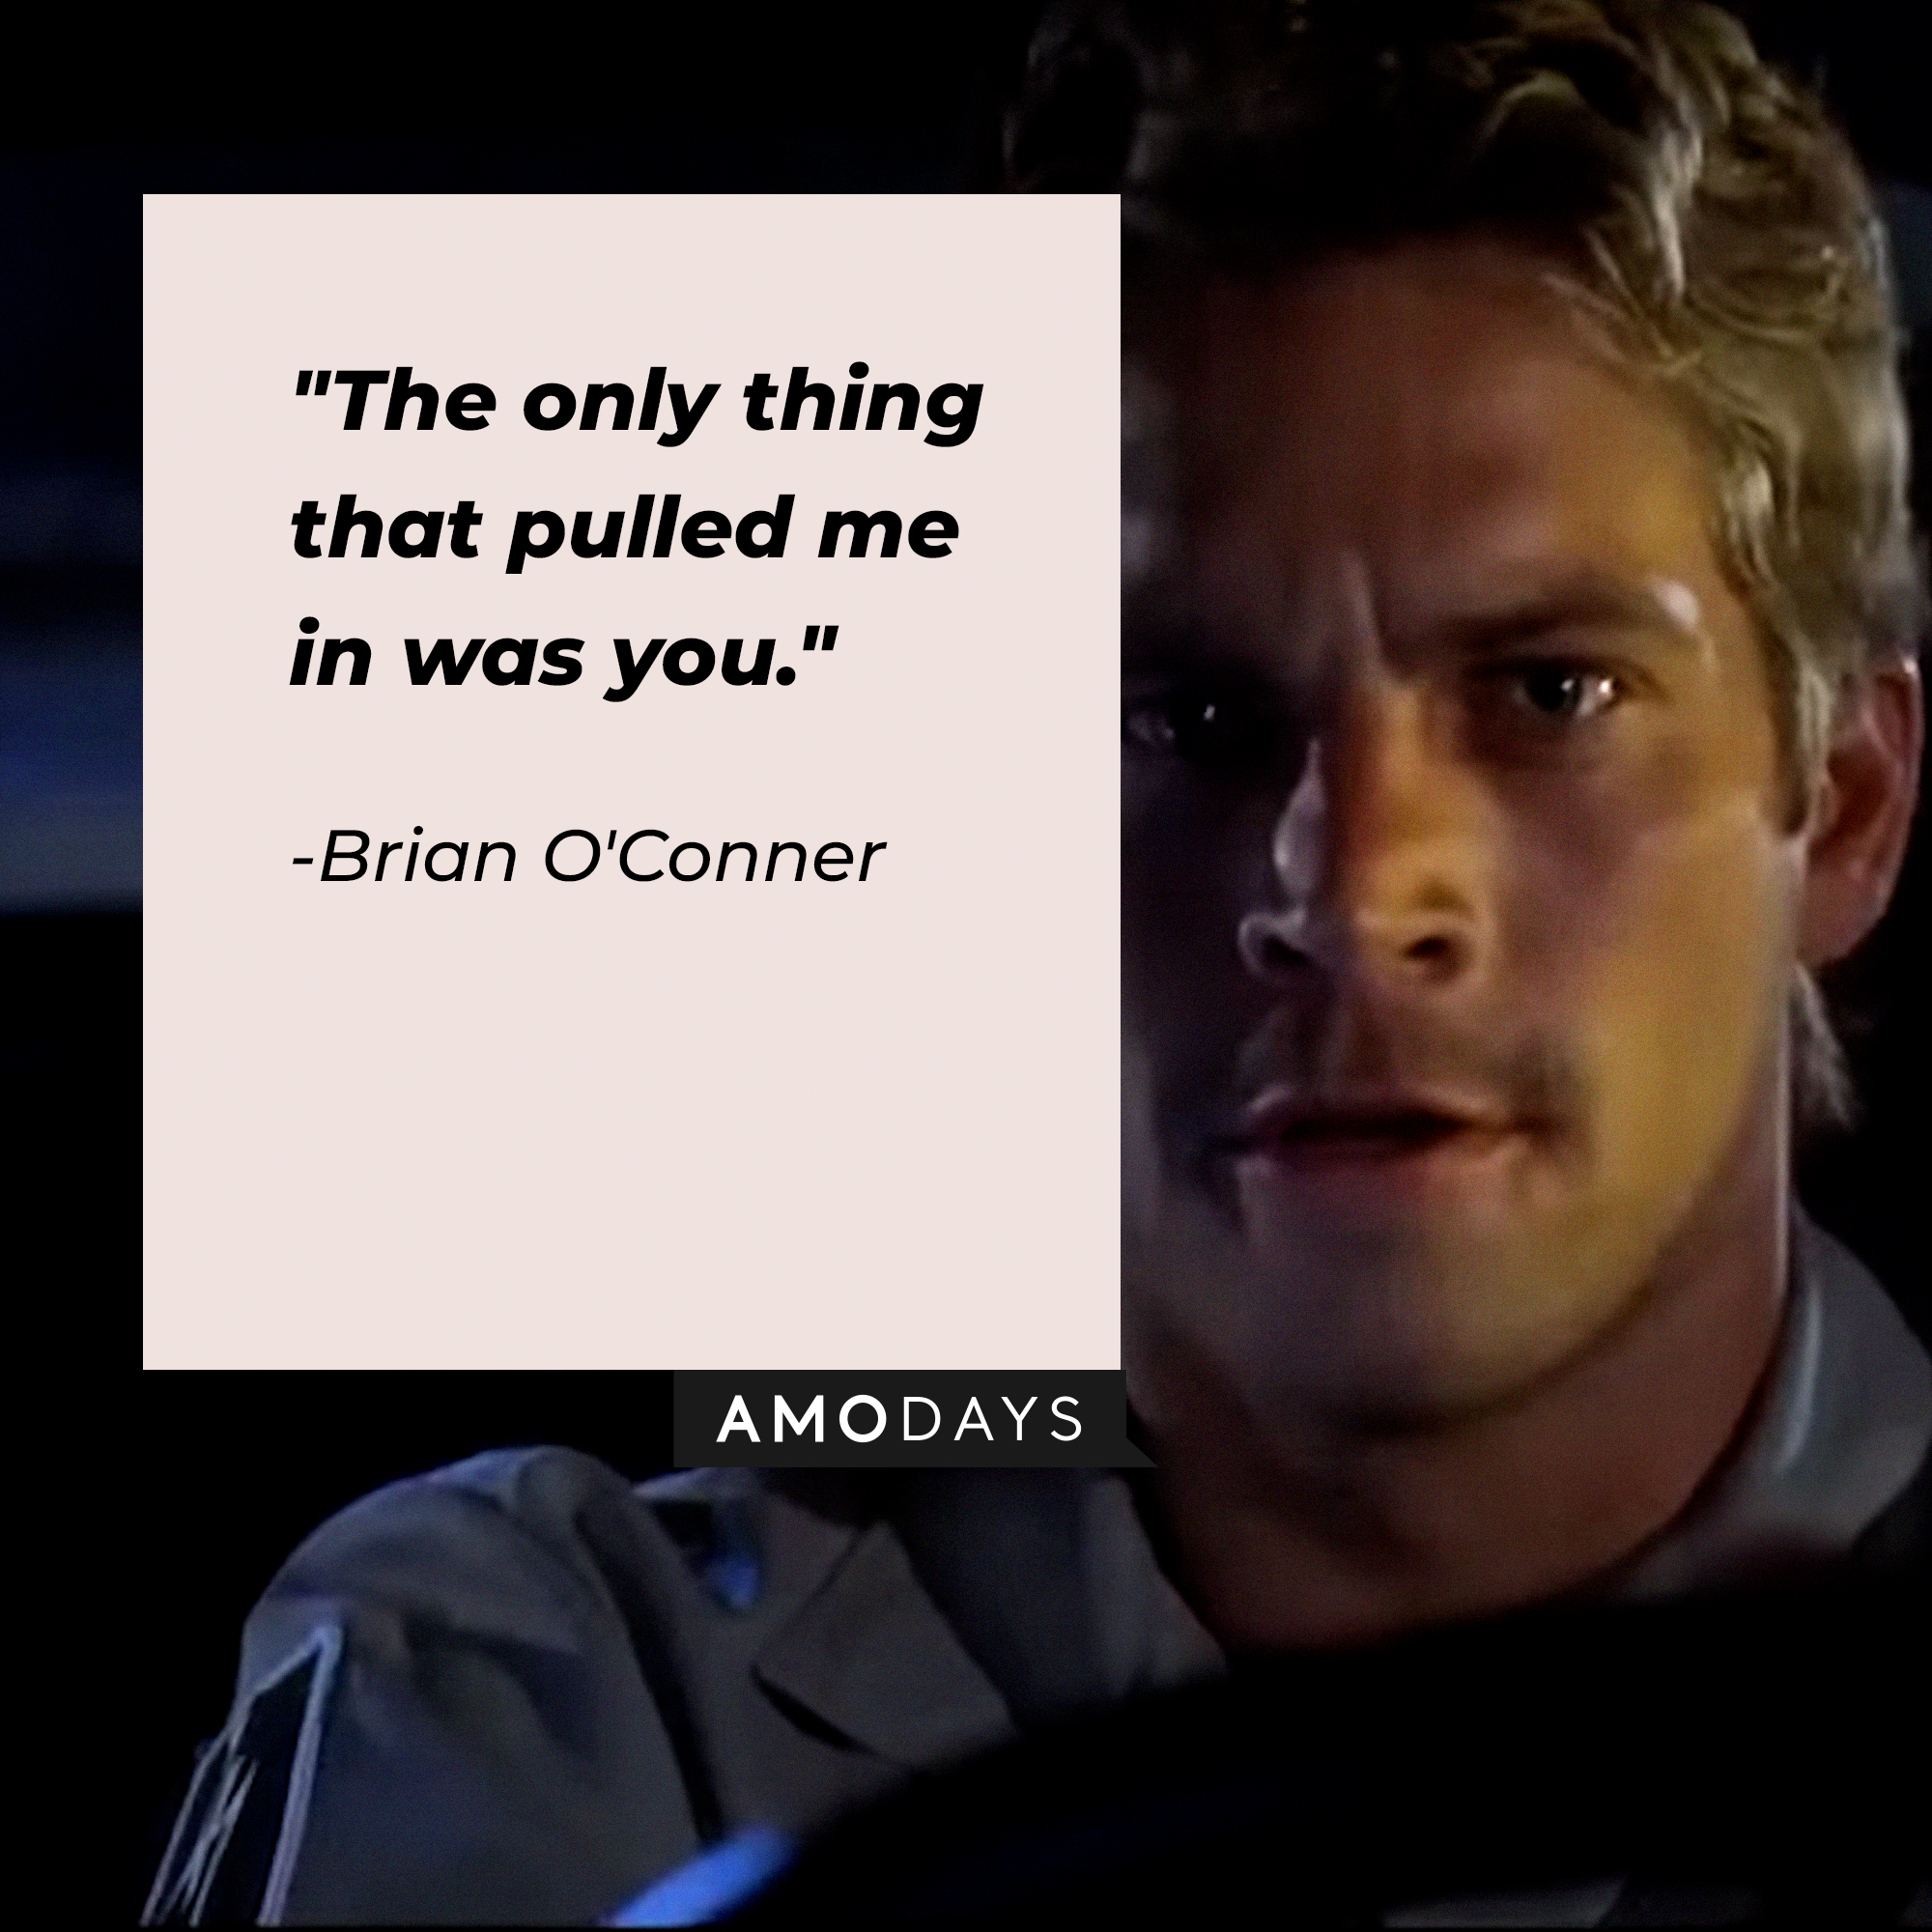 Brian O'Conner, with his quote: “The only thing that pulled me in was you.” | Source:  facebook.com/TheFastSaga